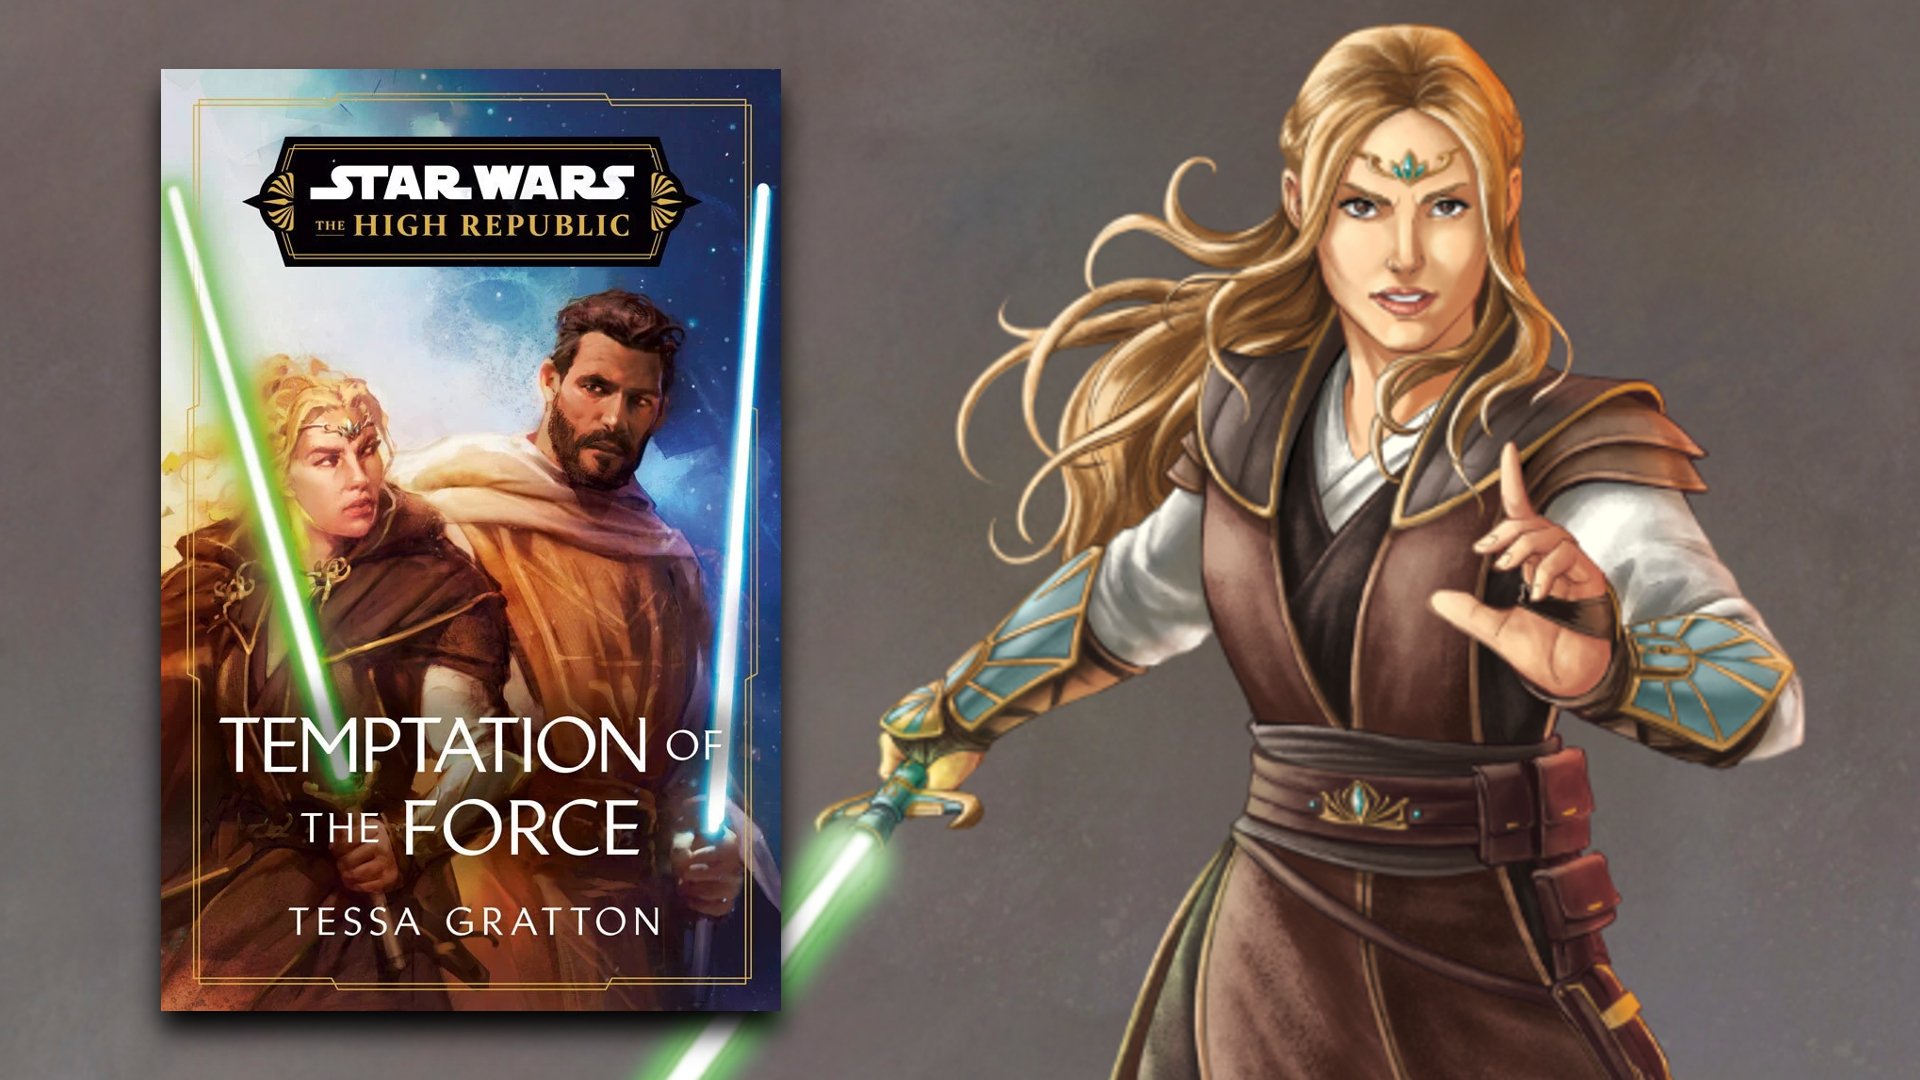 ‘Temptation of the Force’: New Concept Art and Excerpt Released With Avar Kriss’ Message to the Galaxy